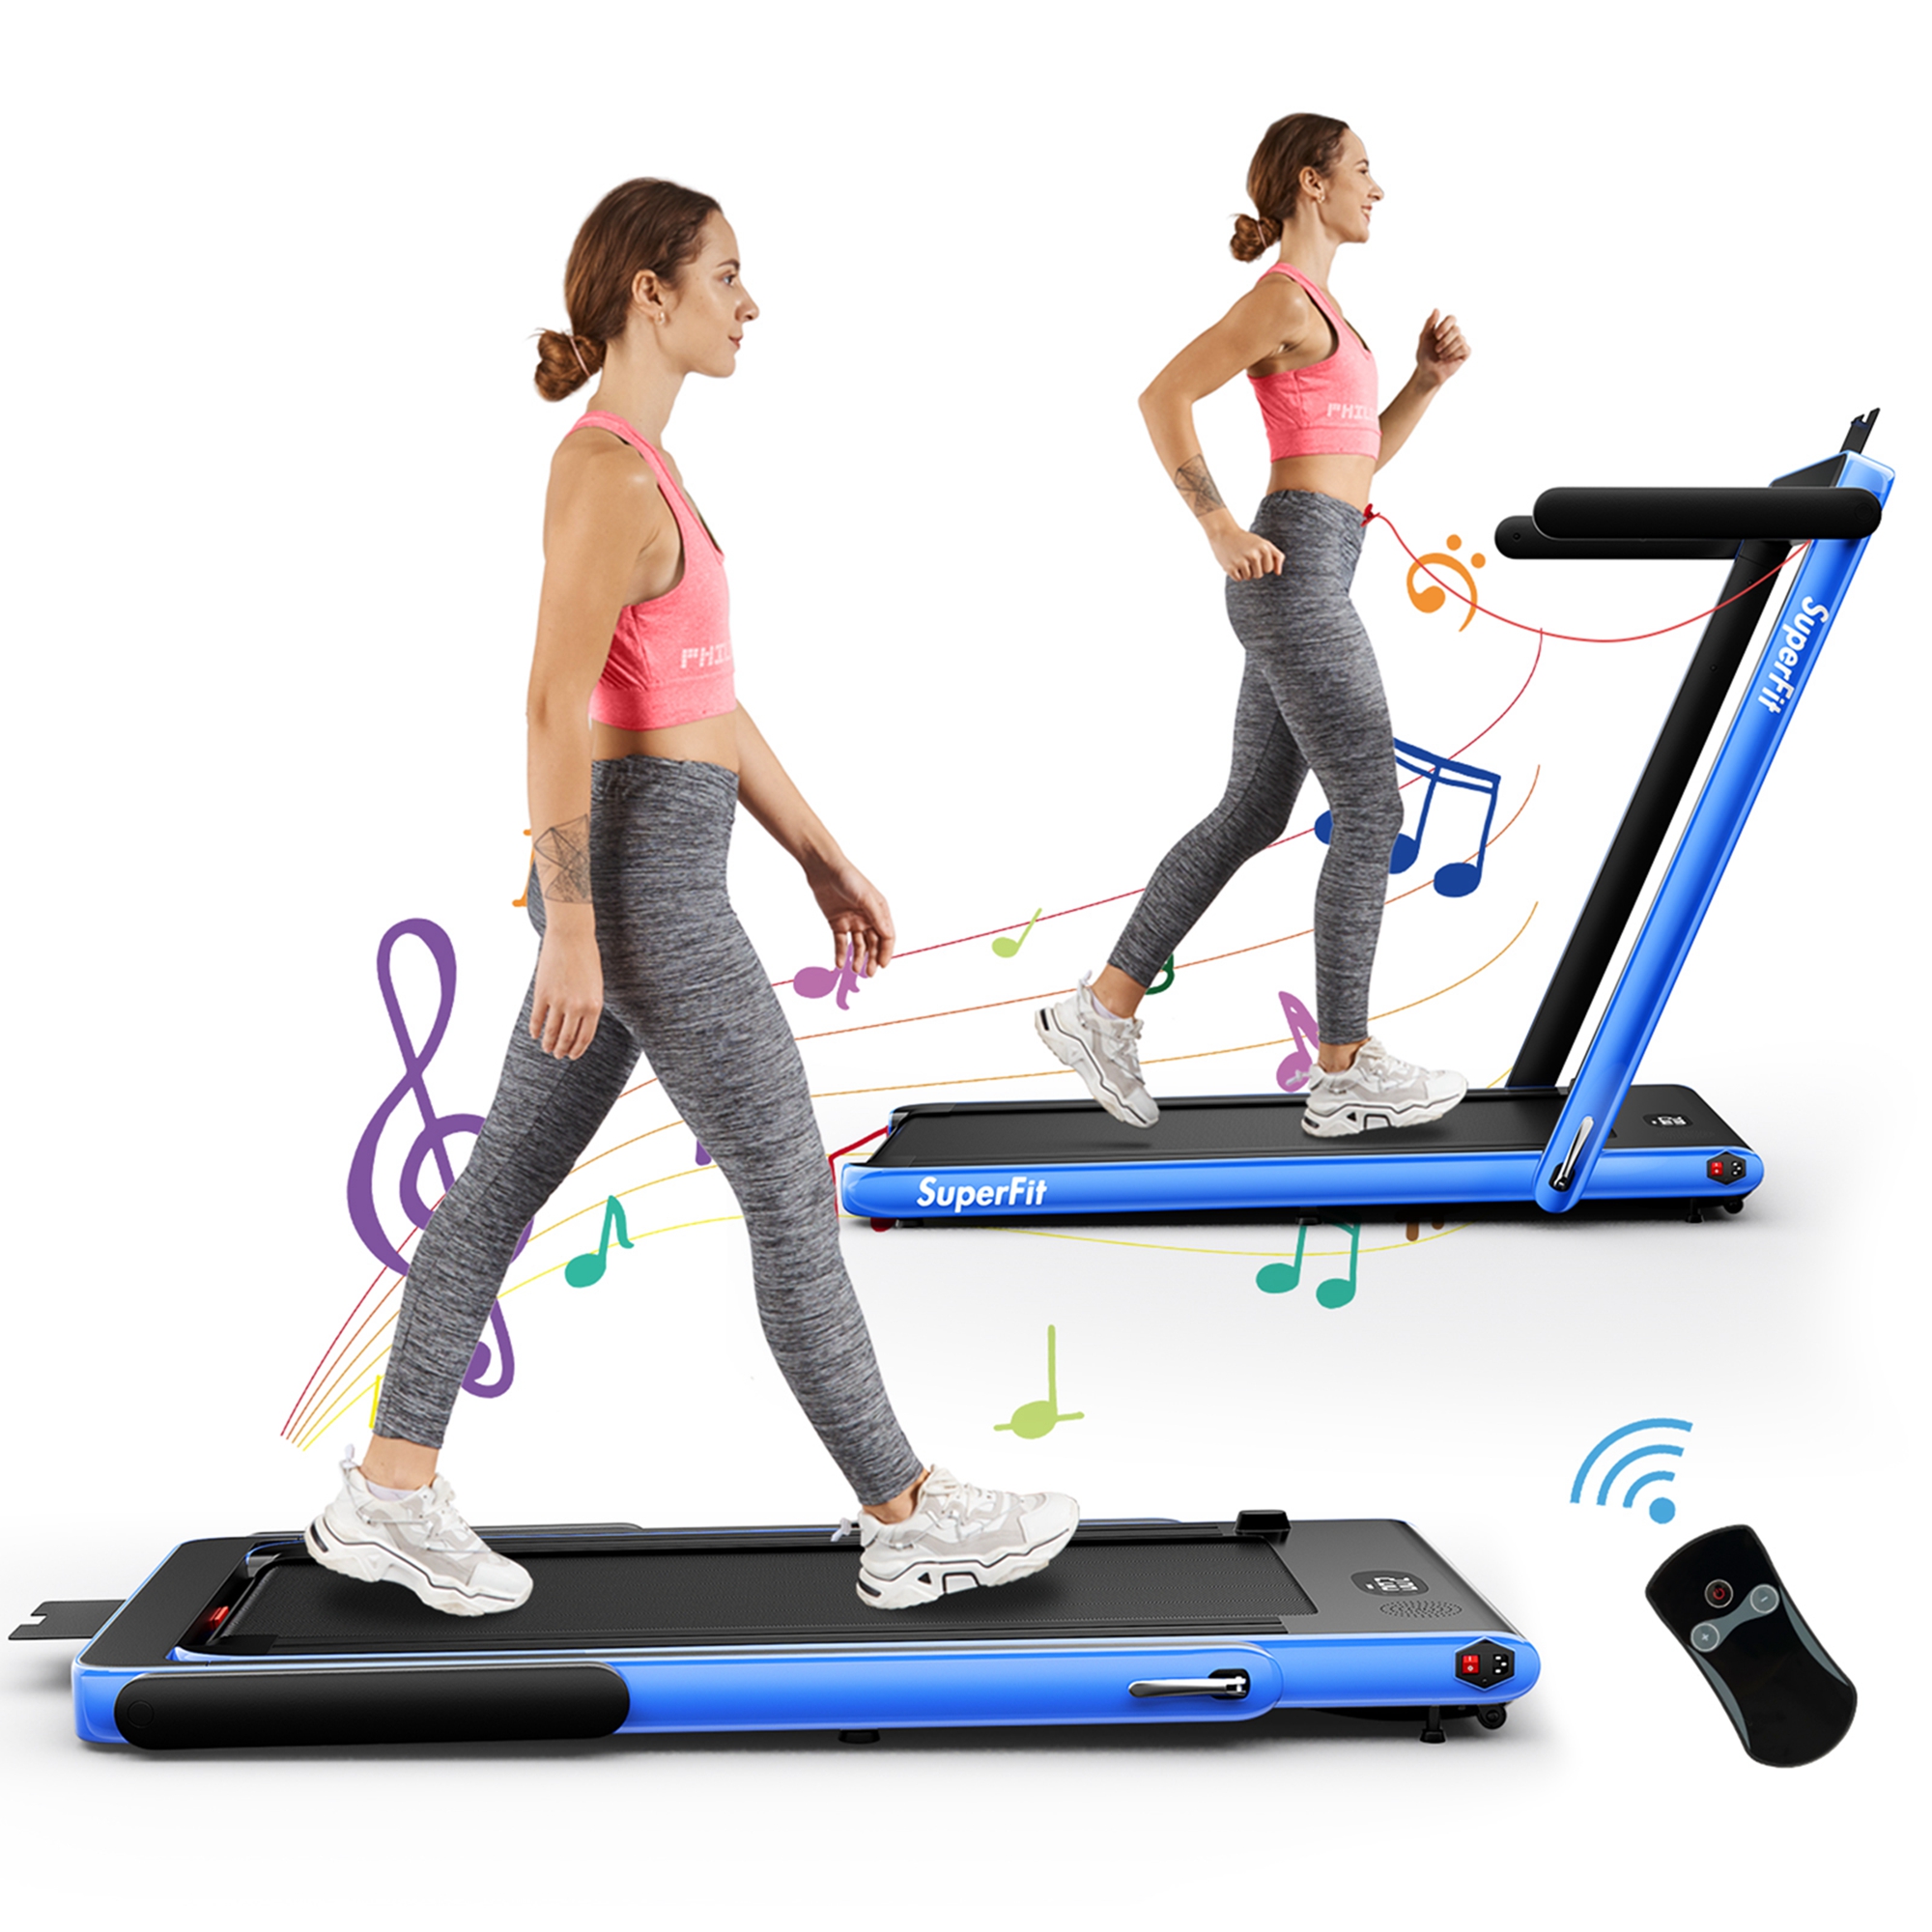 SuperFit Up To 7.5MPH 2.25HP 2 in 1 Single Display Screen Folding Treadmill W/ APP Control Speaker Remote Control Blue - image 1 of 10